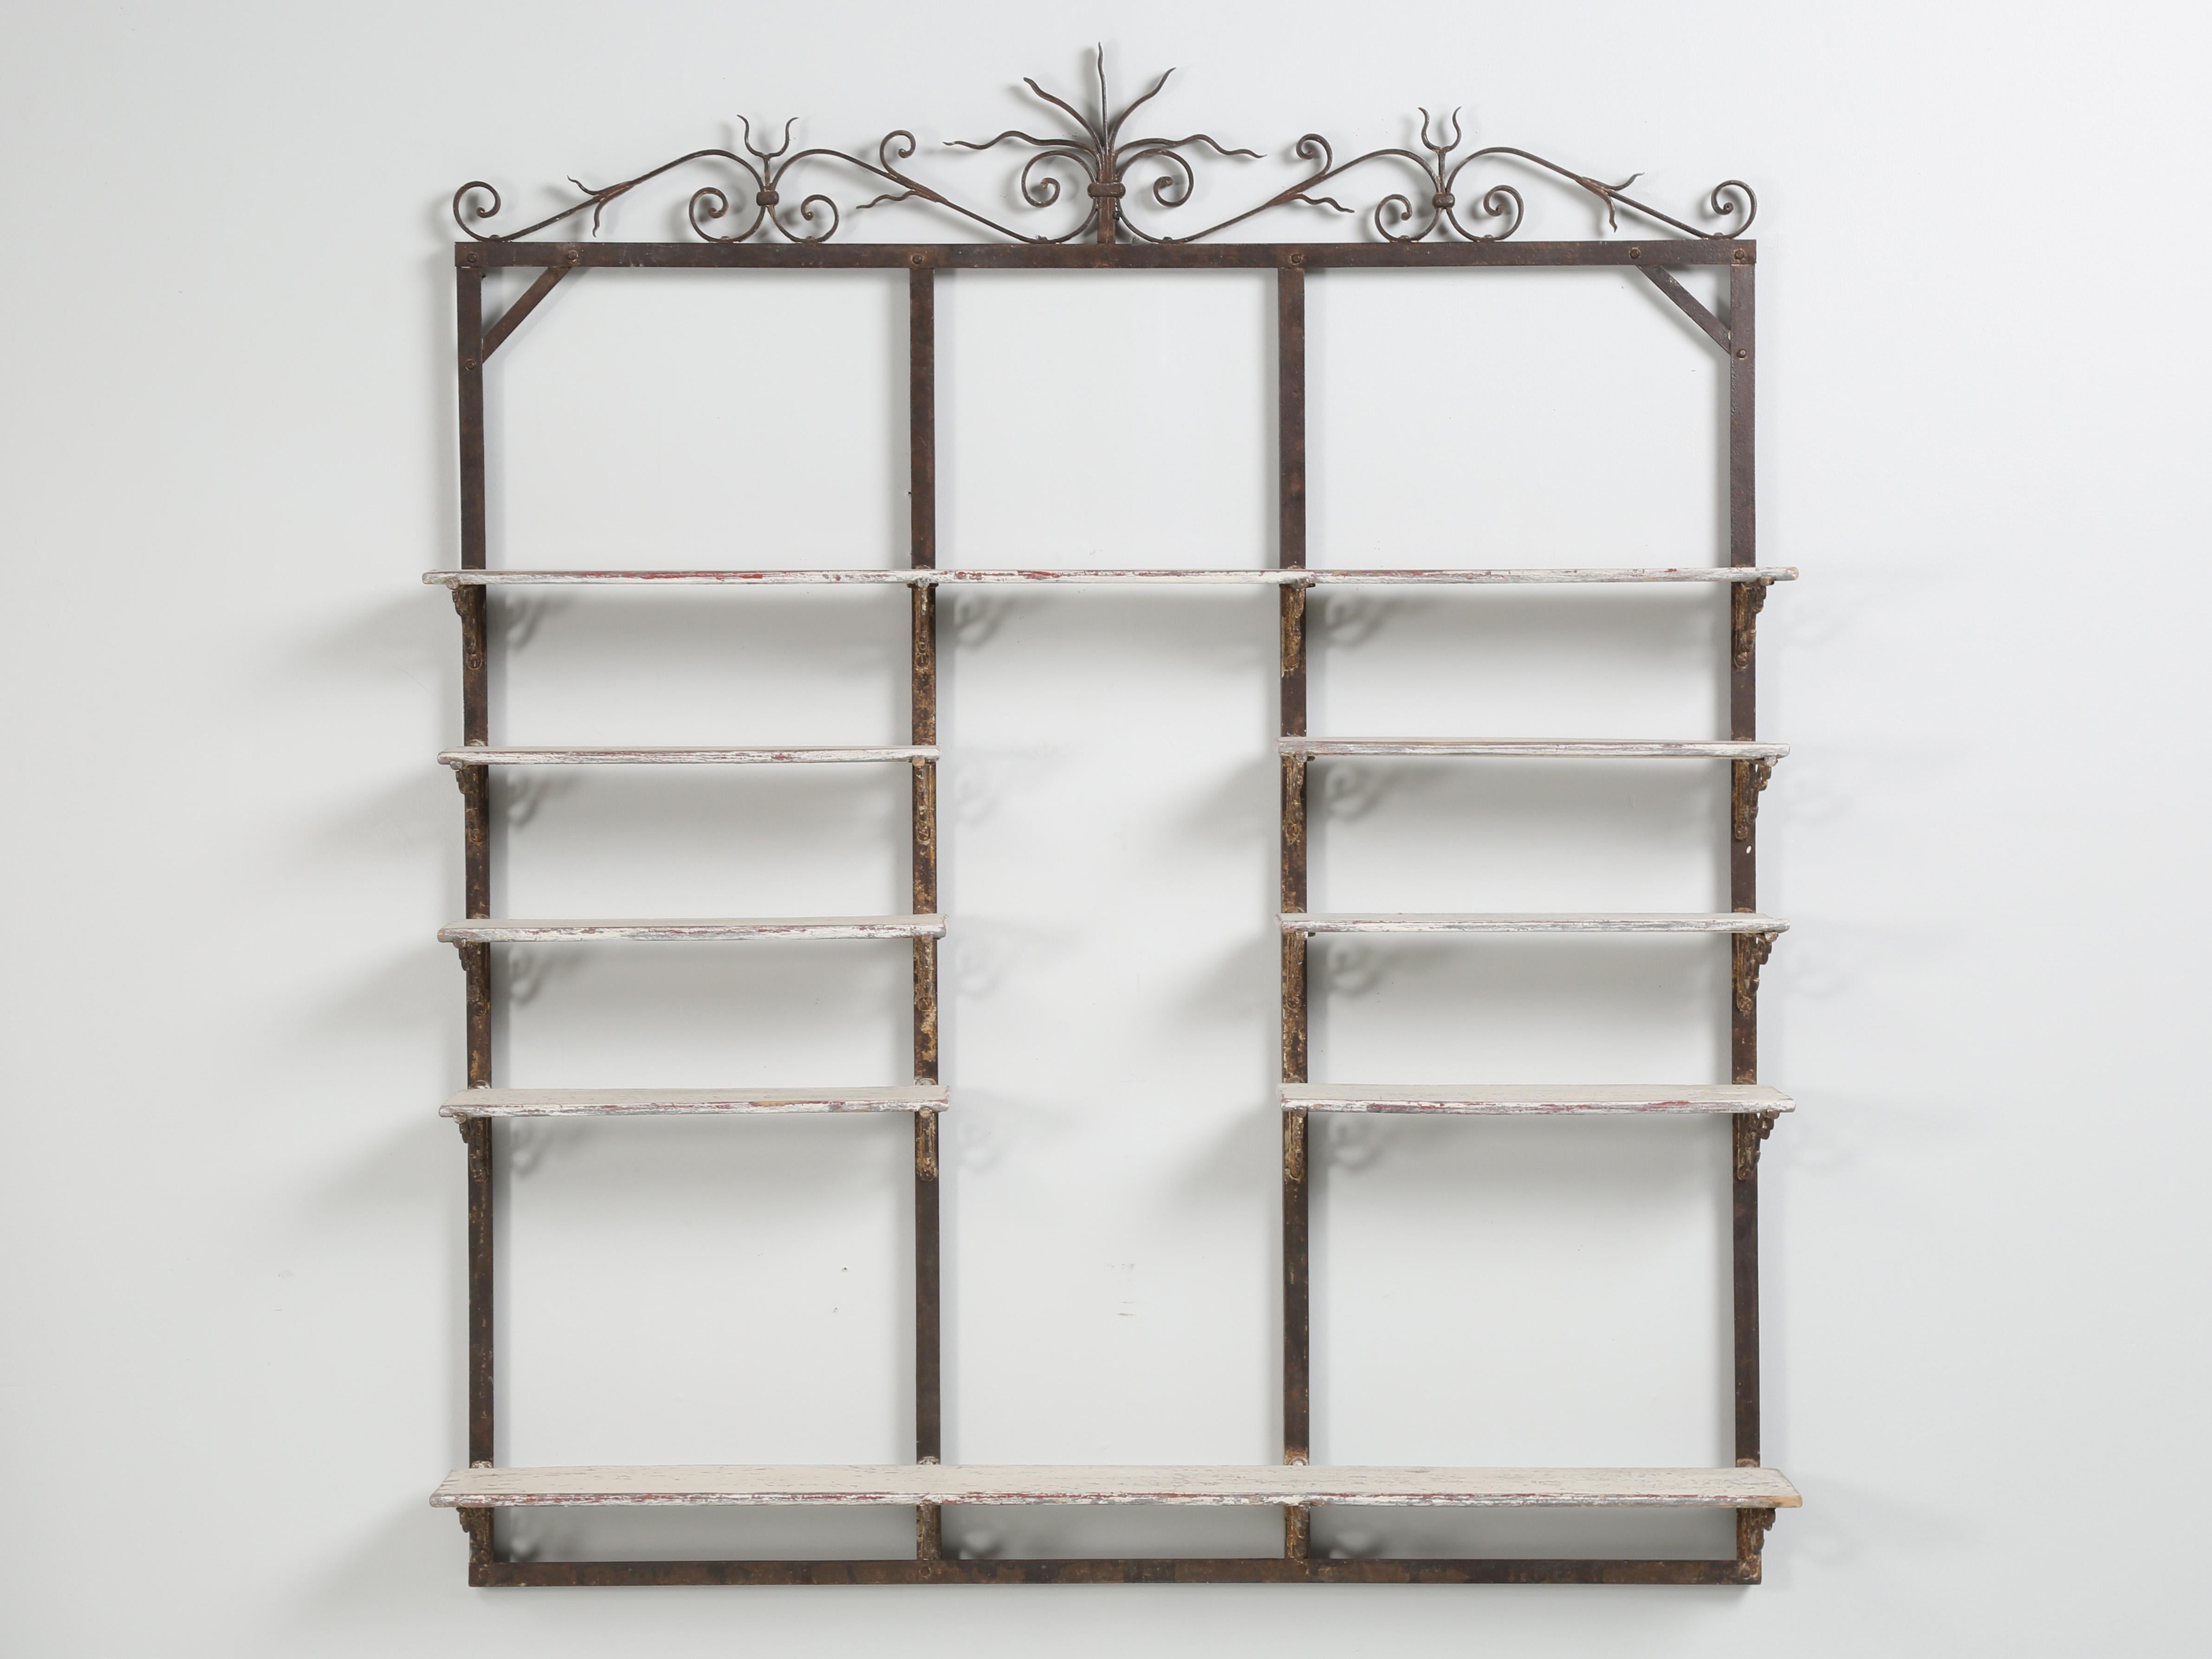 Antique French wall-mounted Commercial Display Rack or Shelf Unit that was previously used in a French Bakery from the South of France. Sometimes, when you see an old item, you instantly know it’s the right look. From the Original Patina of this